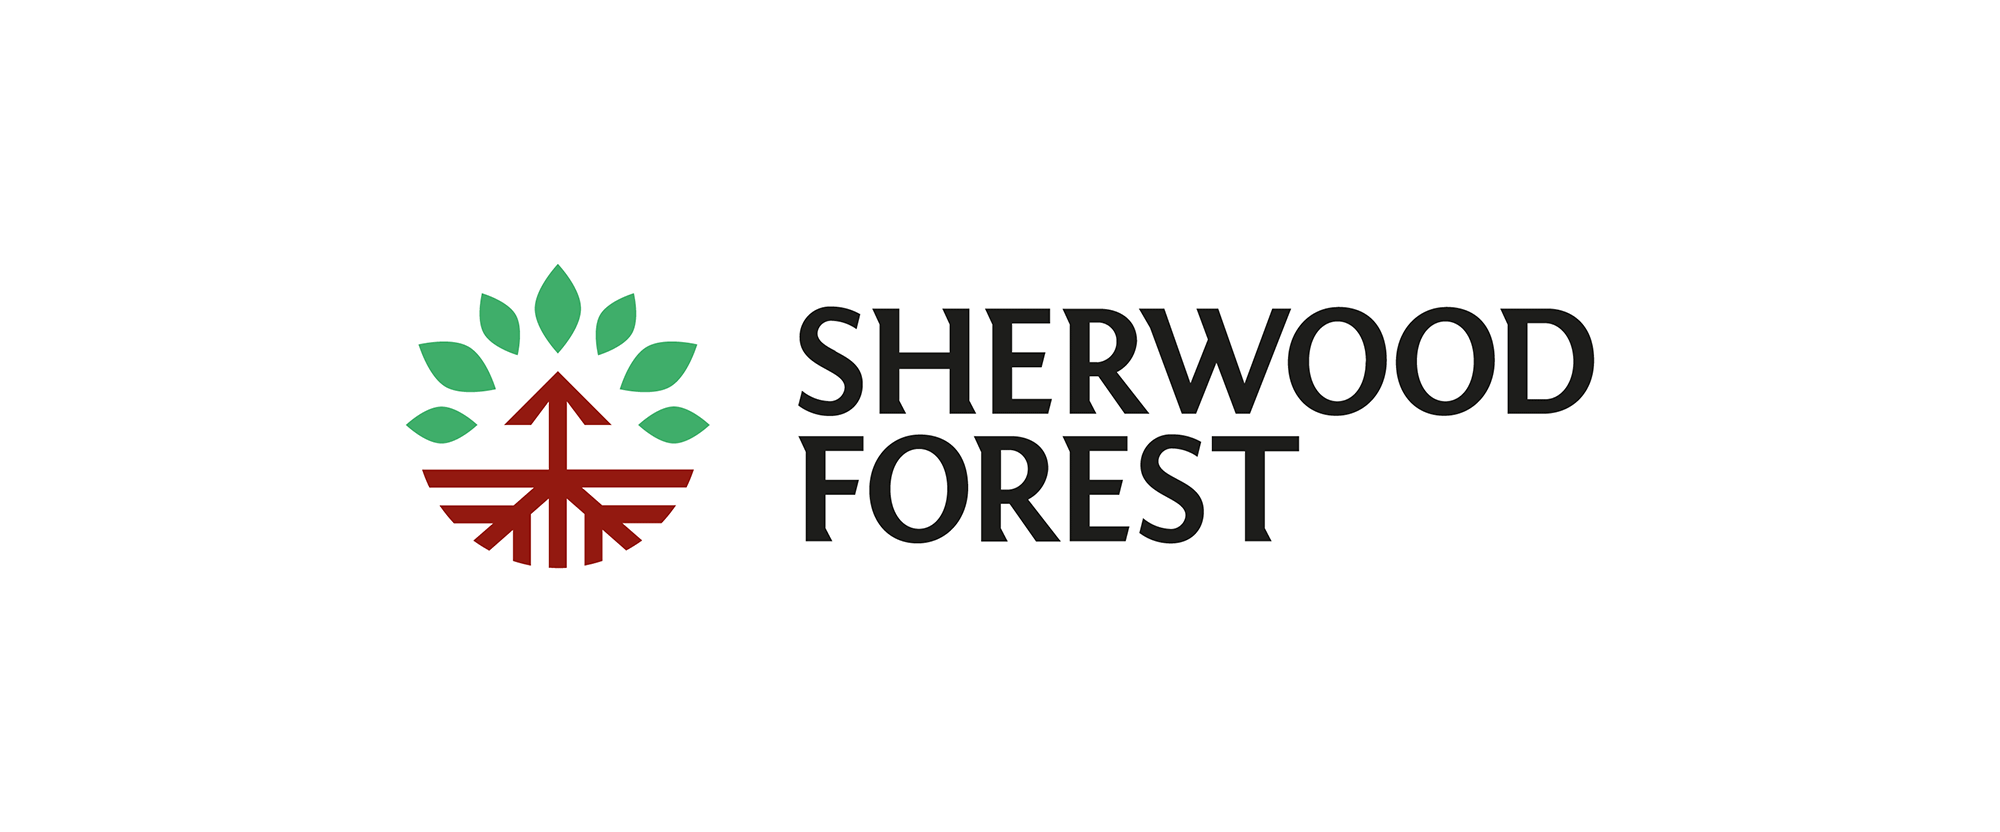 Forest Logo - Brand New: New Logo and Identity for Sherwood Forest by Cafeteria